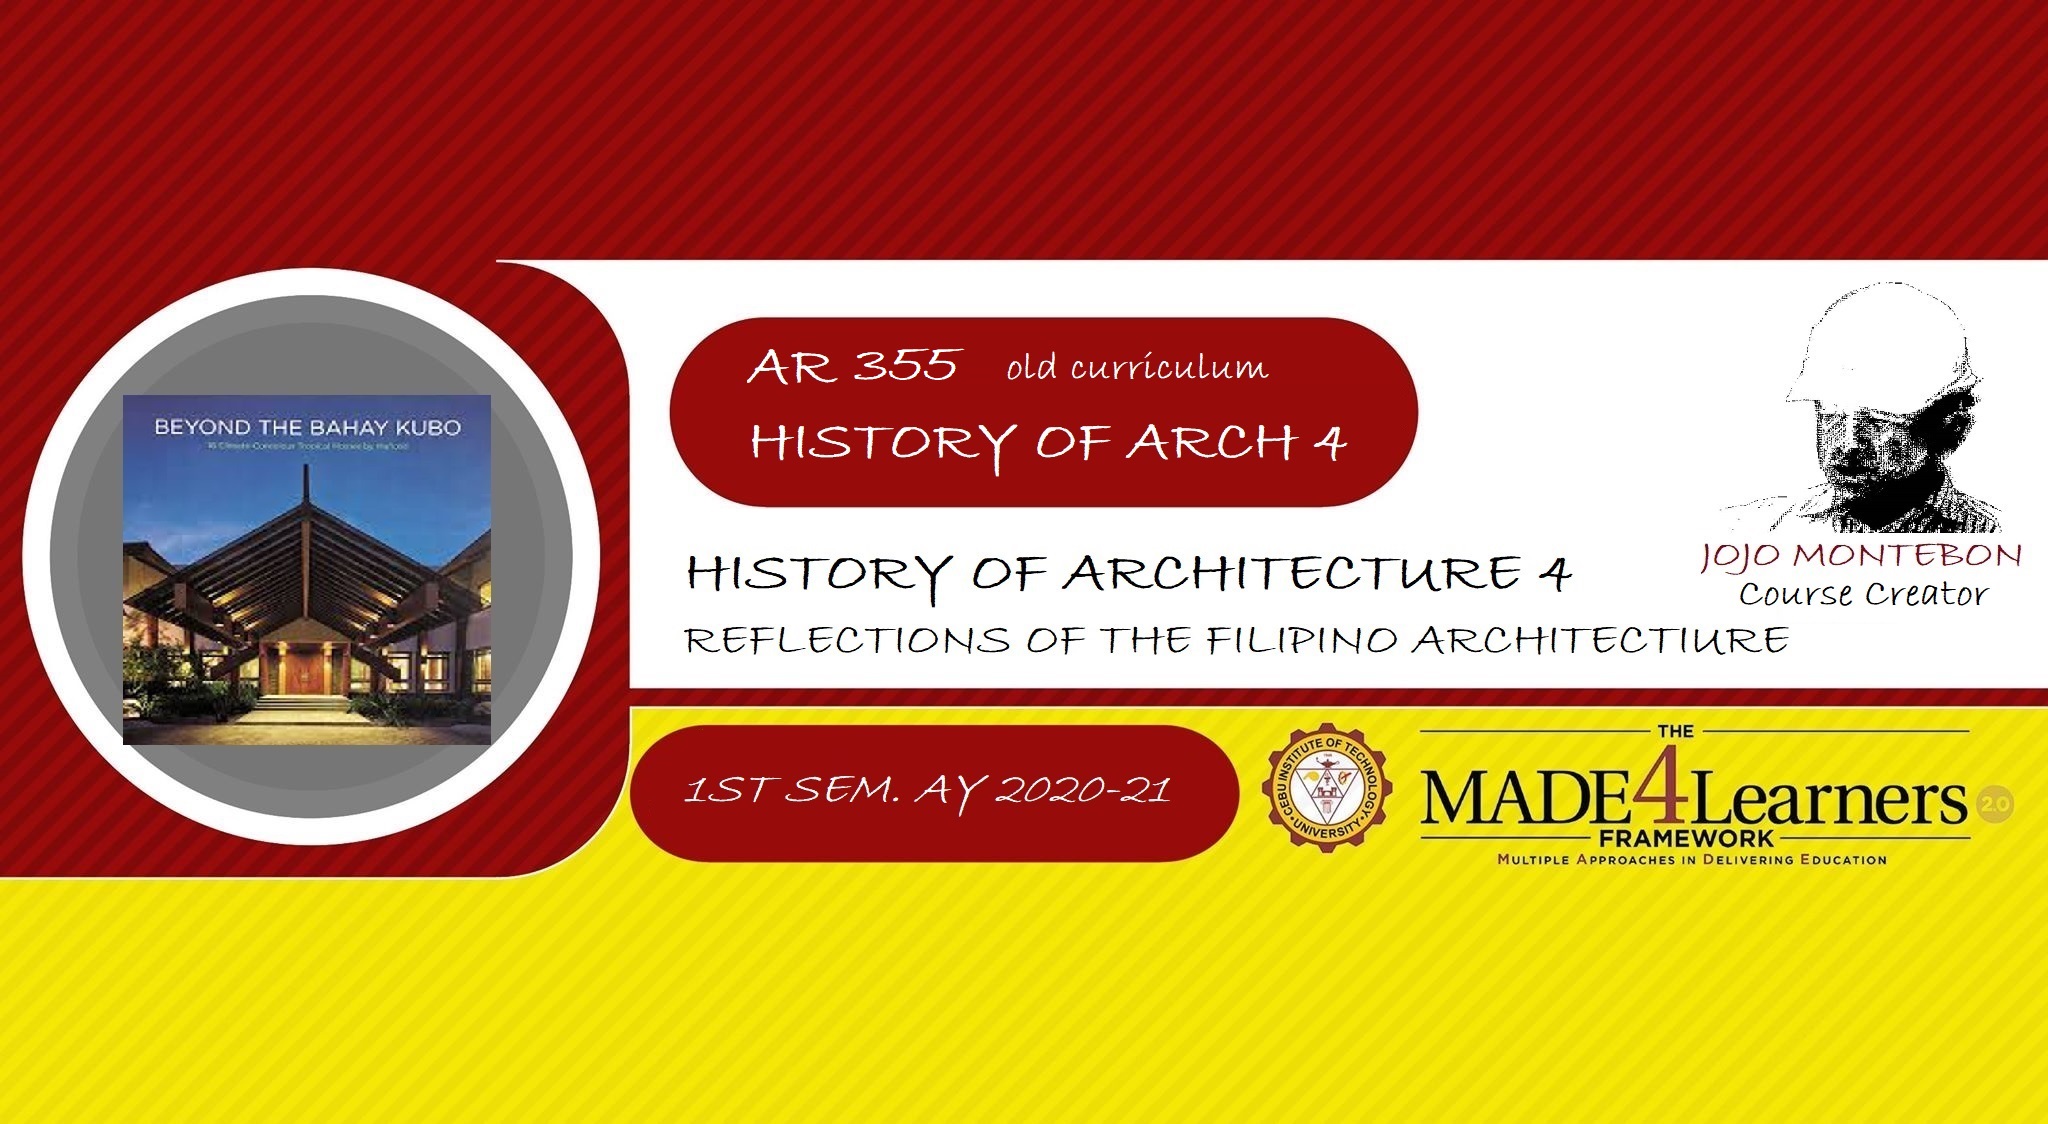 AR355 (old curriculum): HISTORY OF ARCHITECTURE 4